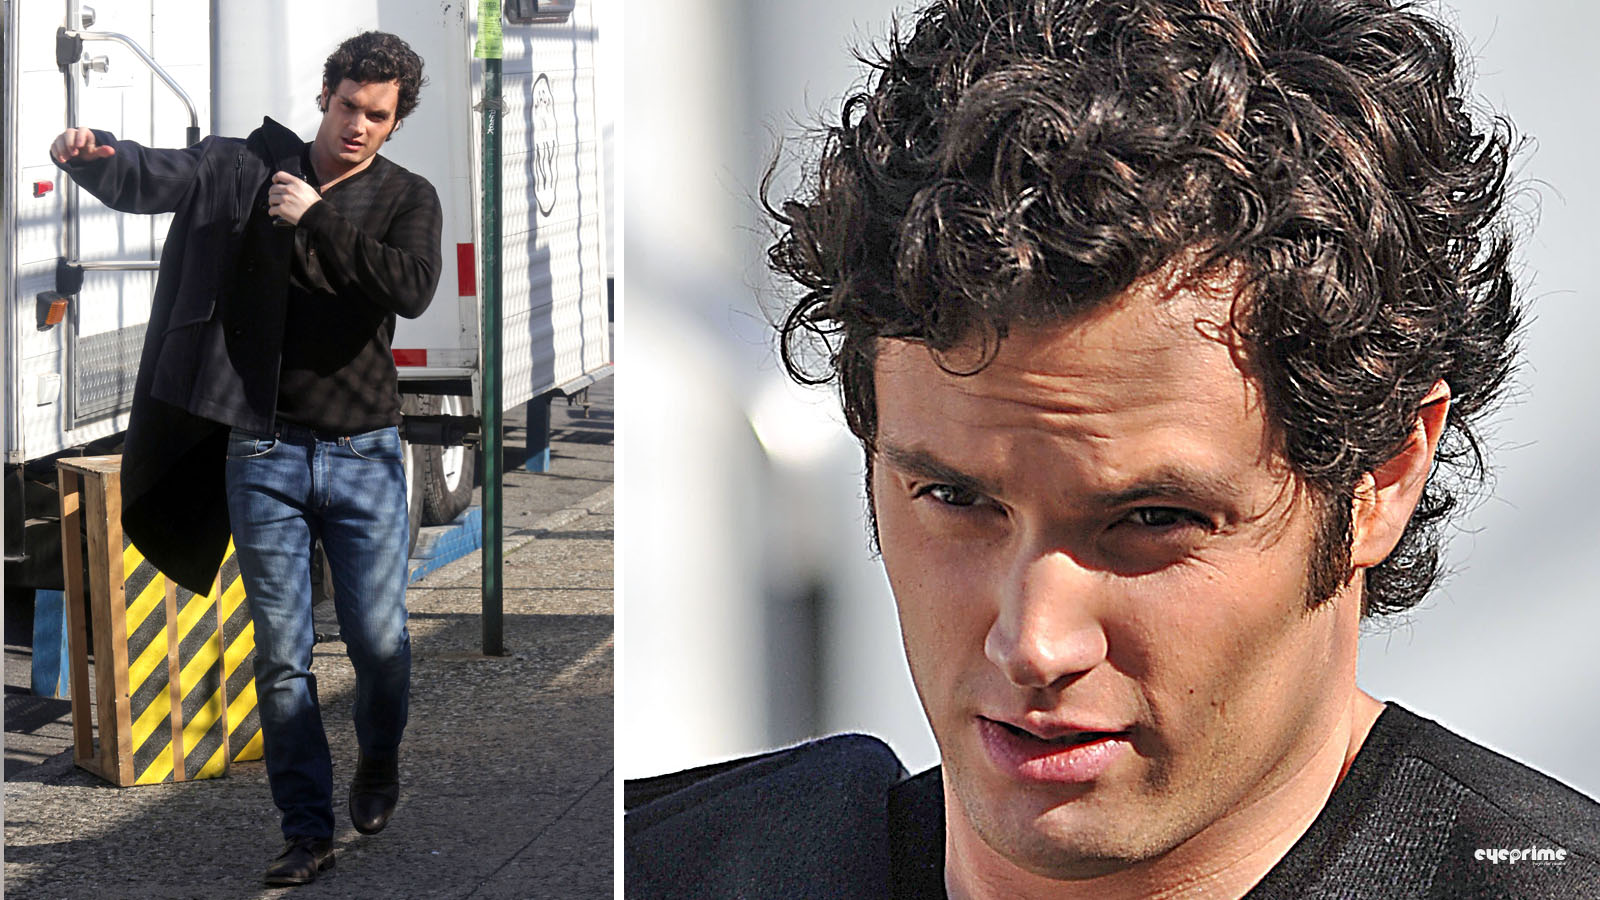 Penn Badgley Is Very Sexy And Hendsome Hollywood Actor